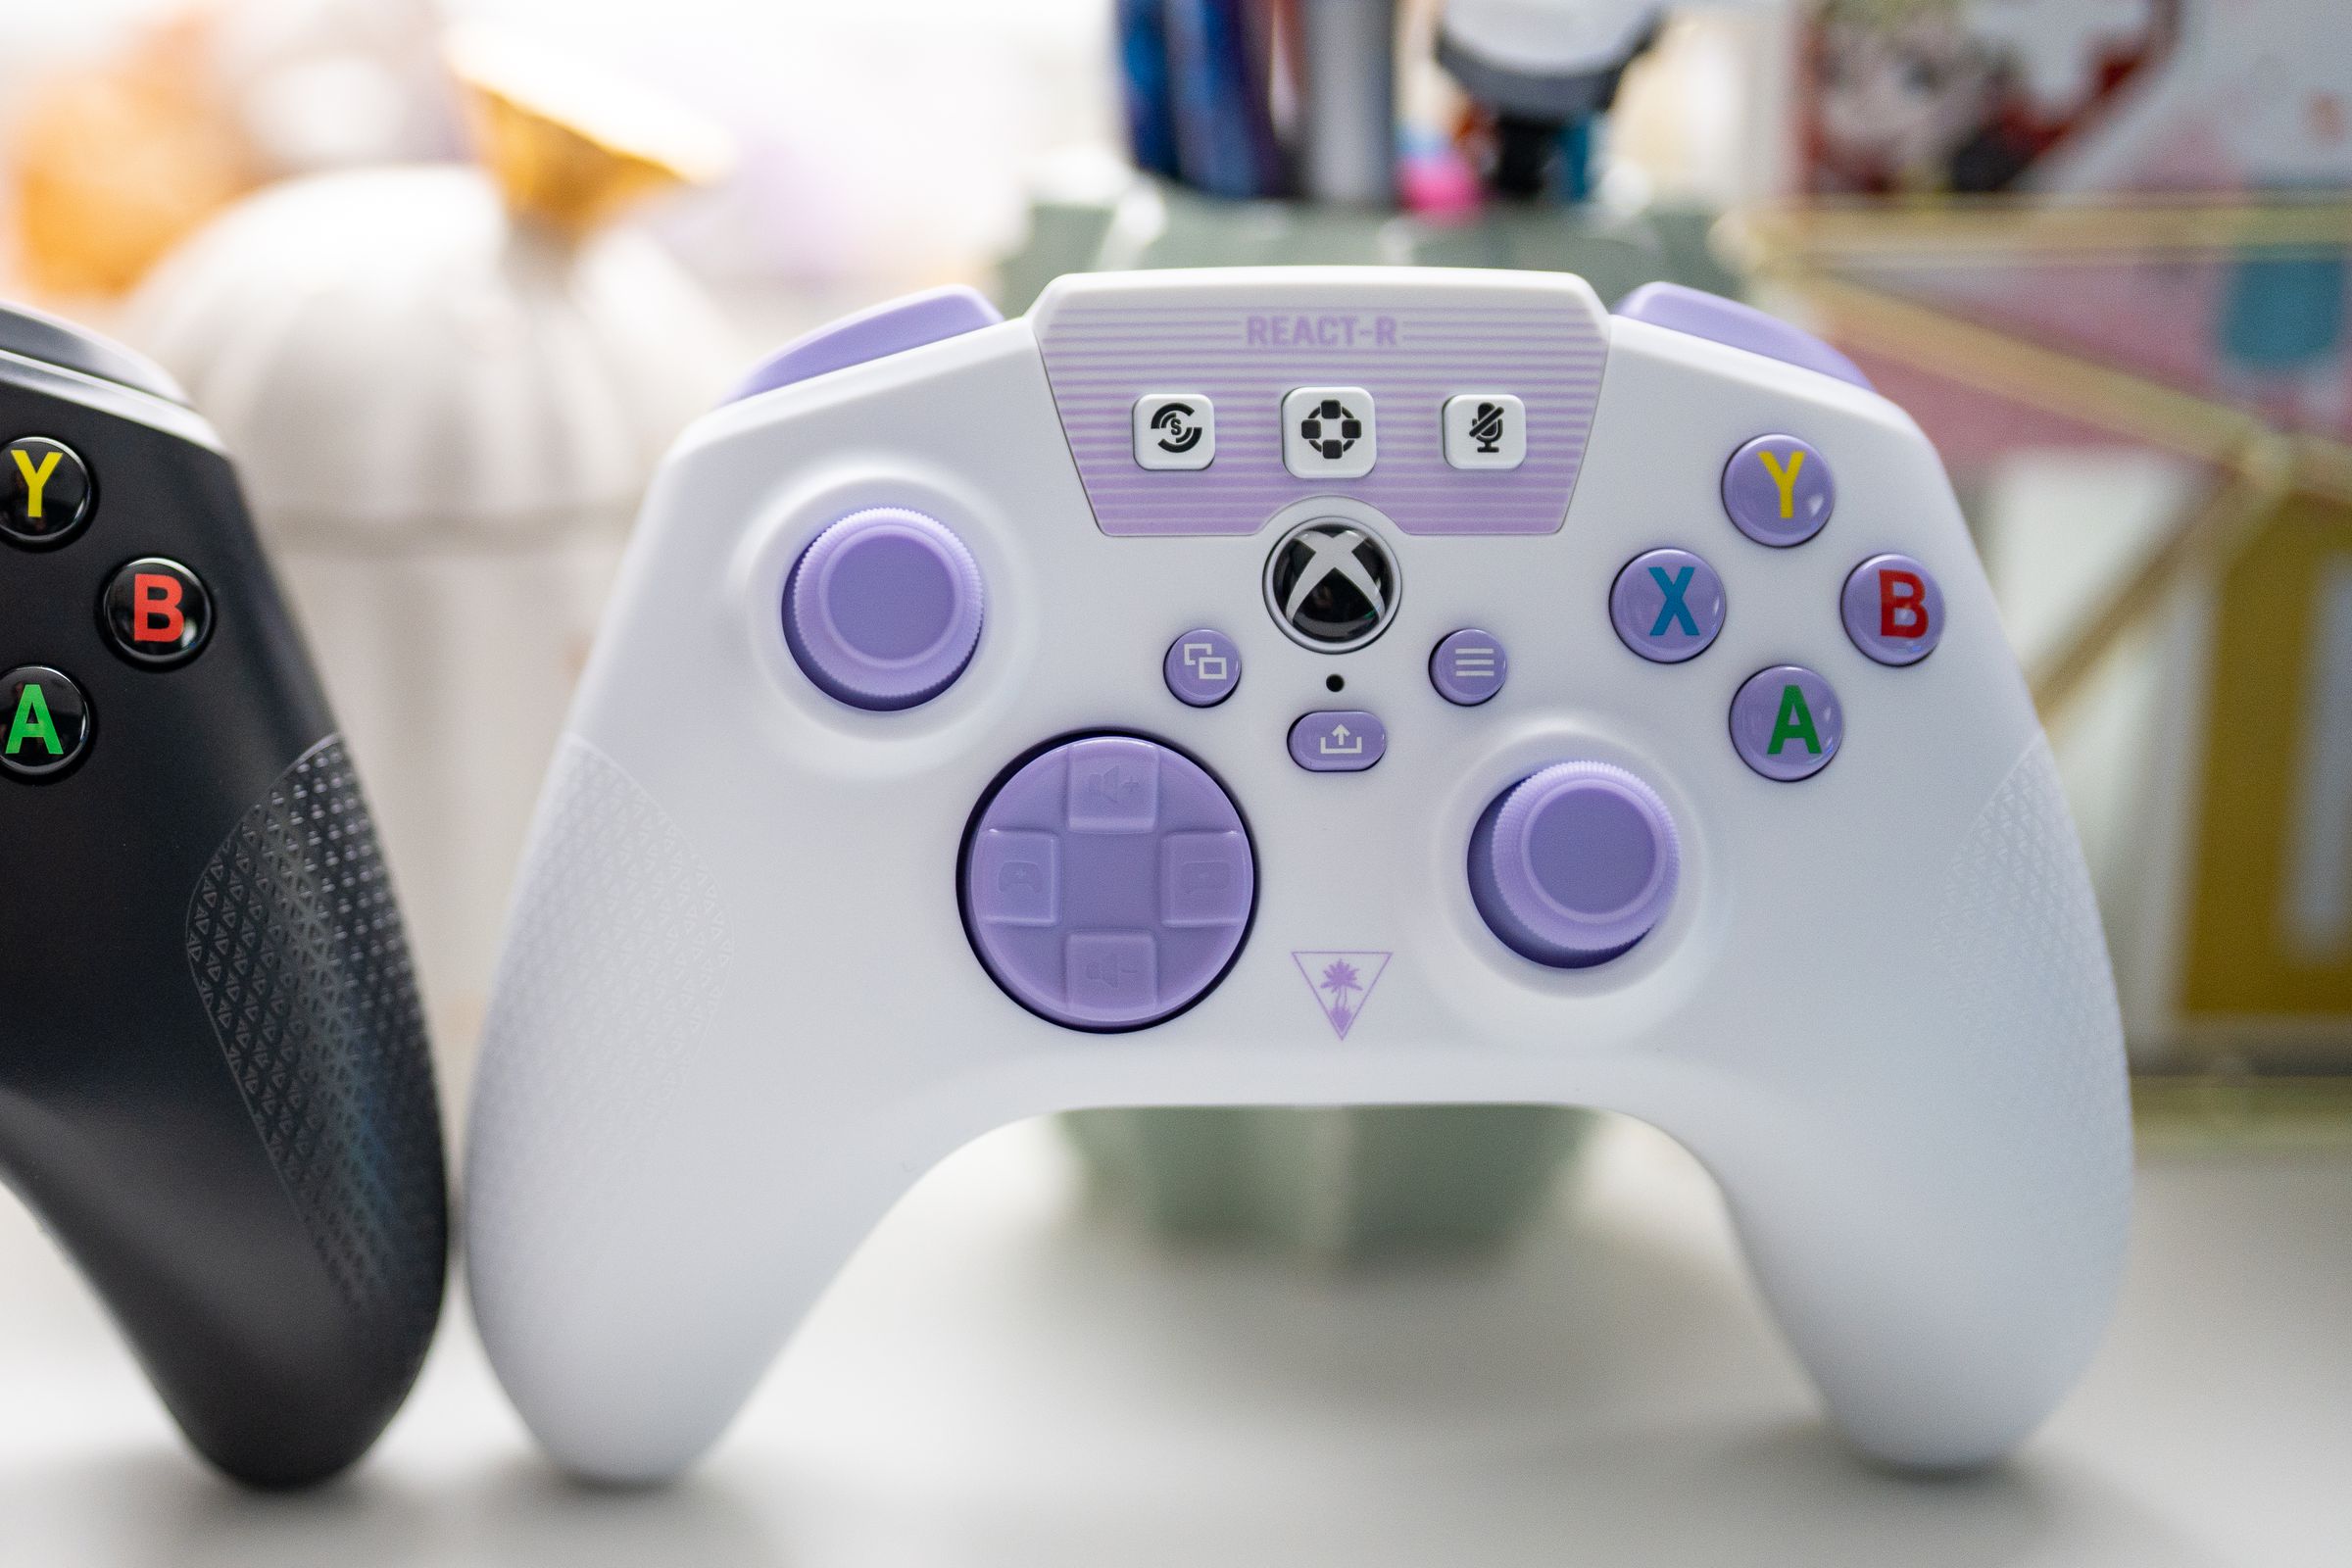 A side-by-side image of the Turtle Beach React-R controllers, black on the left and white / purple on the right.